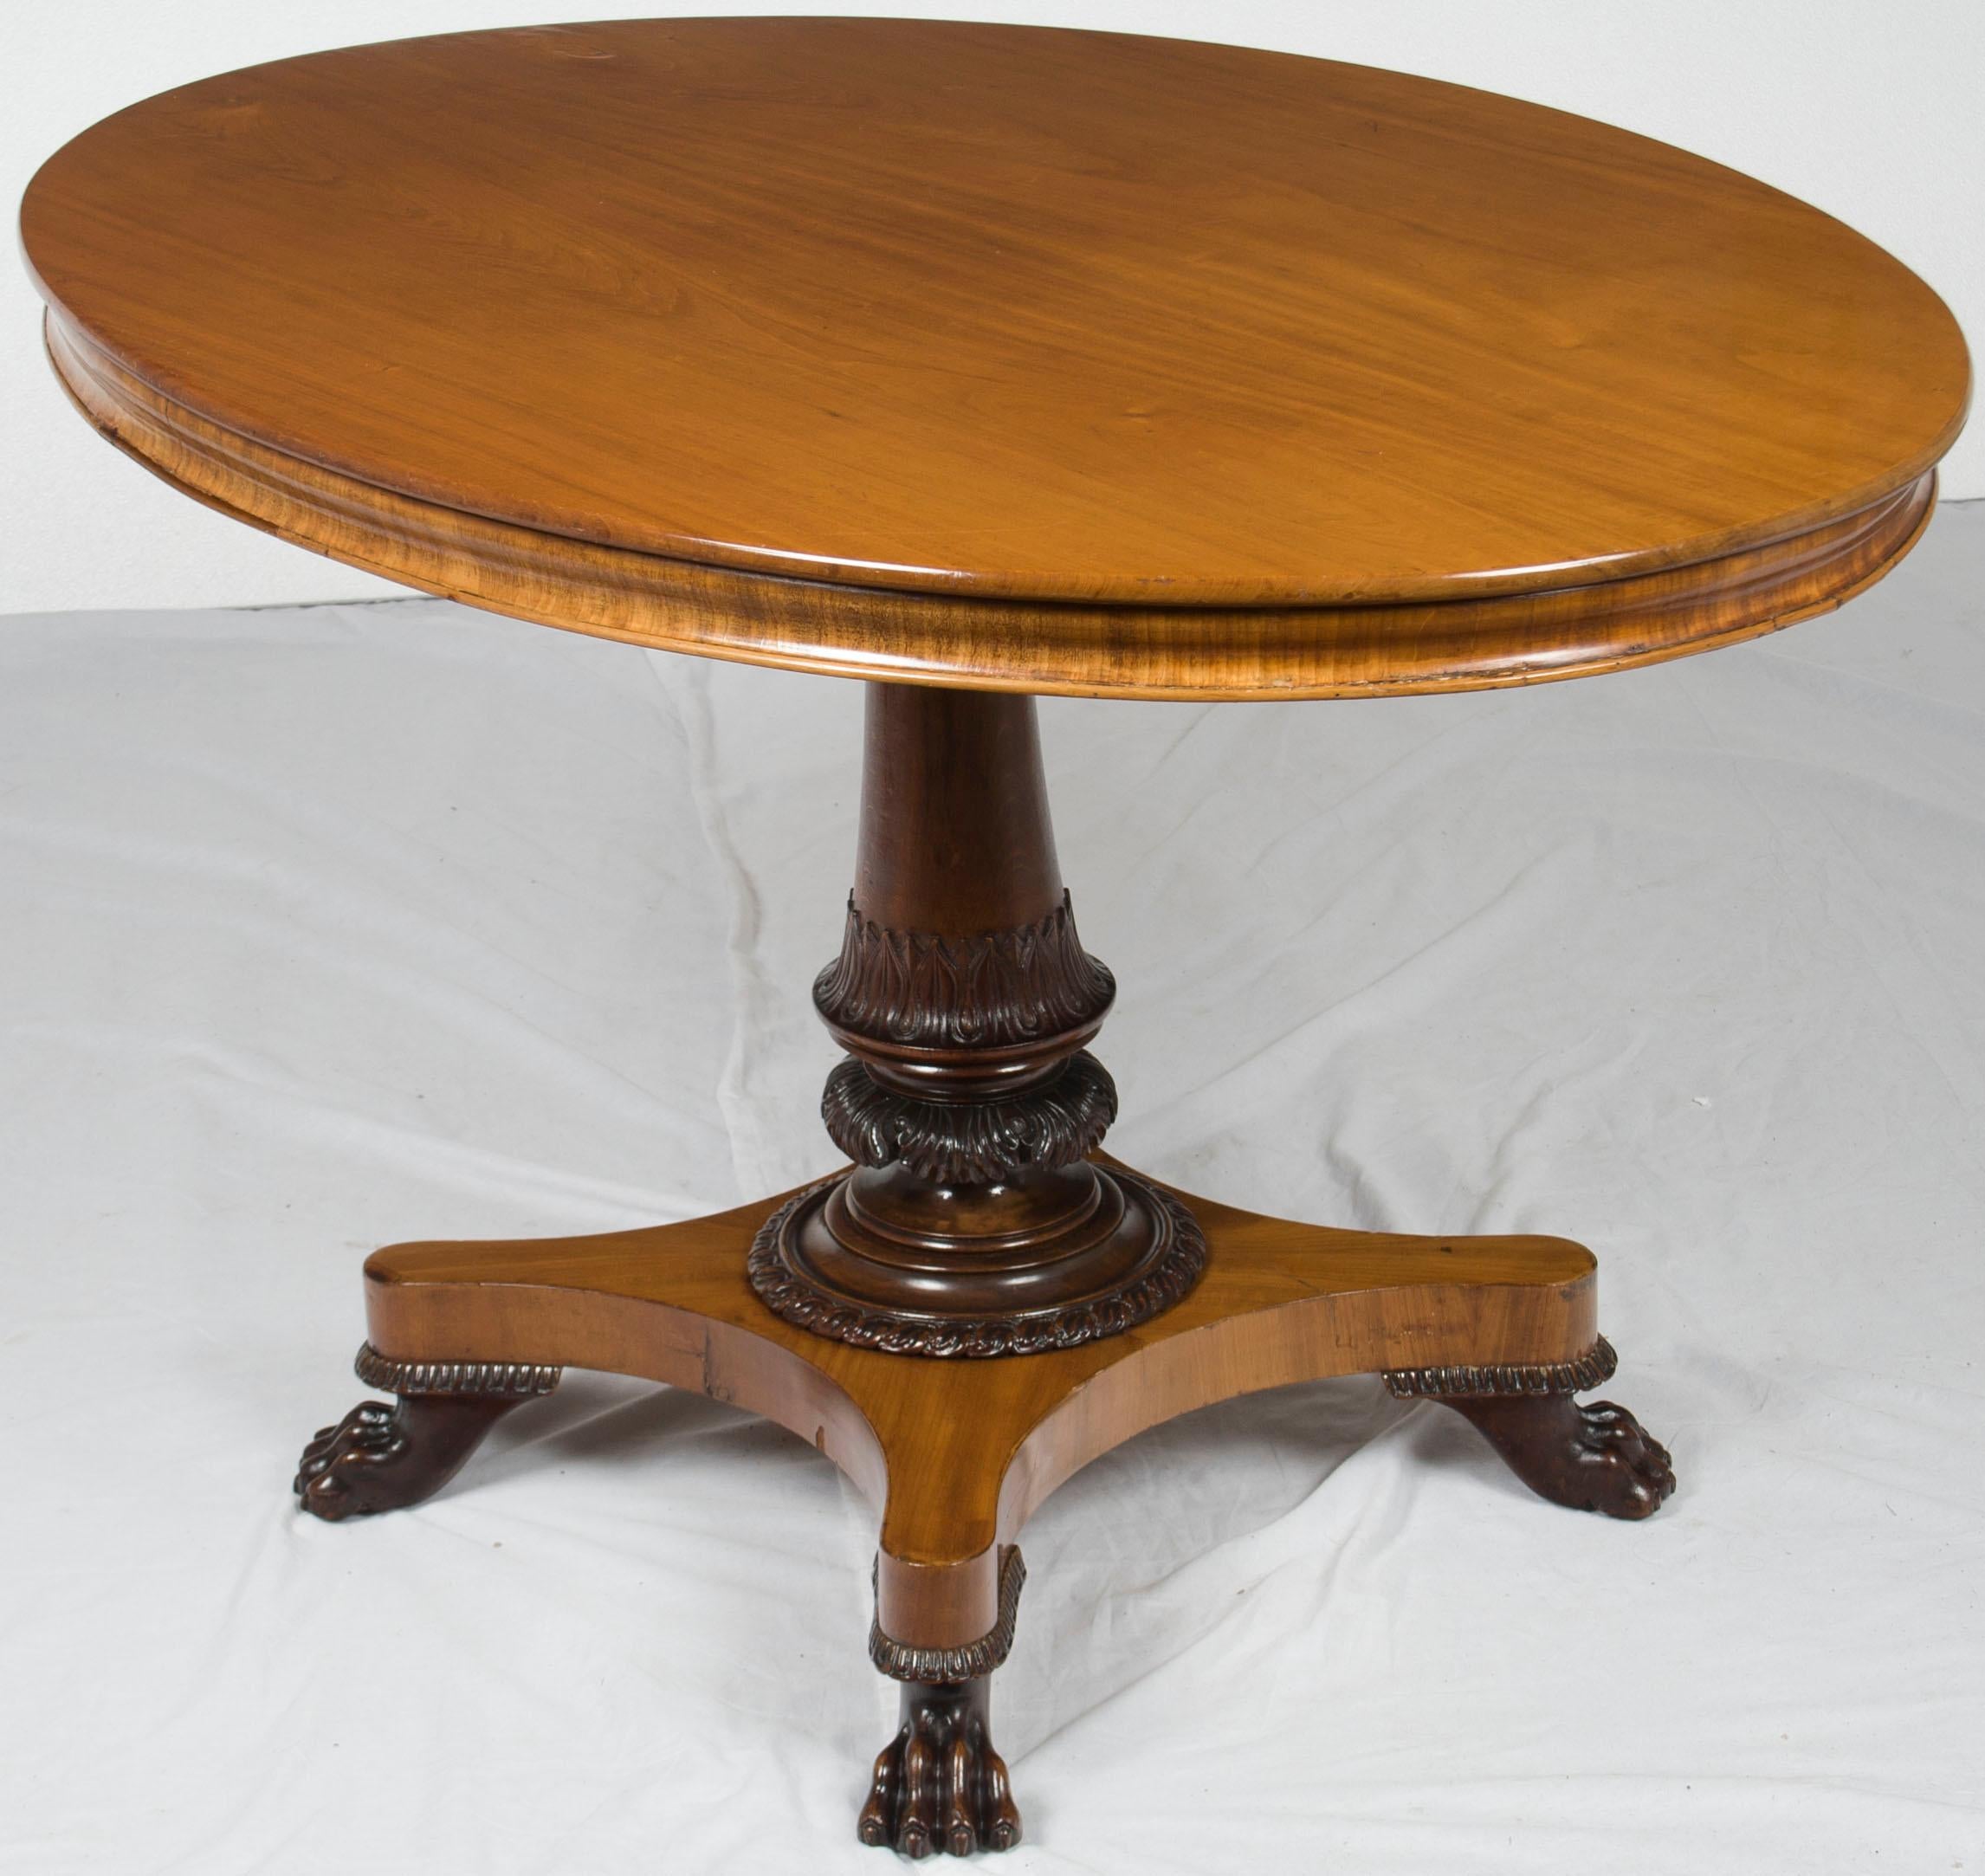 Mahogany and Oak Empire Style Large Oval Center Foyer Table Claw Foot Pedestal (Spätes 19. Jahrhundert) im Angebot